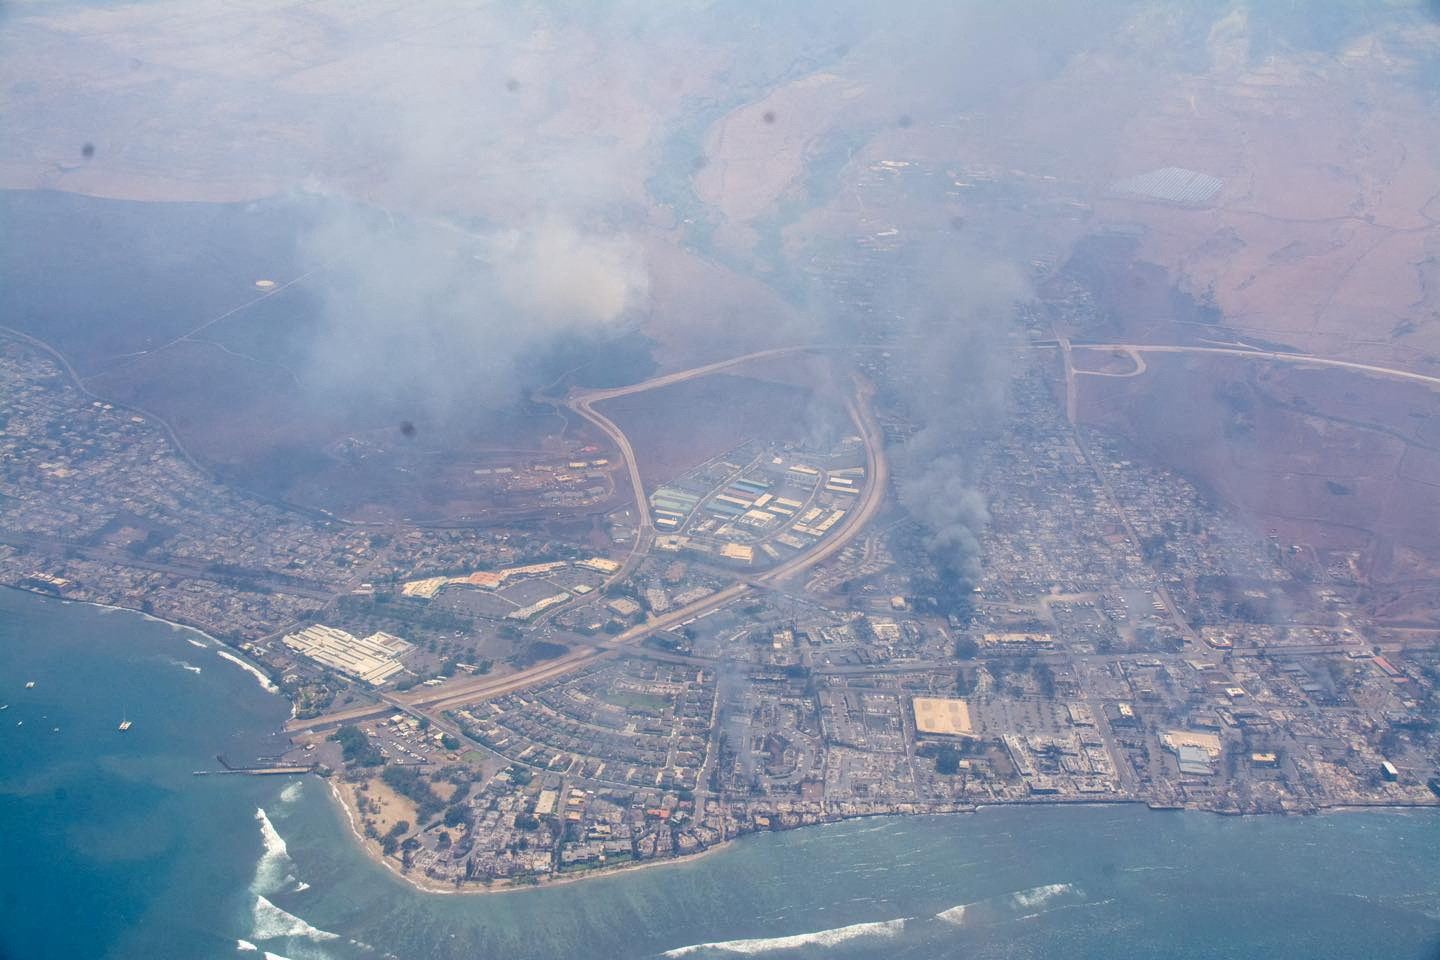 Explainer How did the Hawaii wildfires start? What to know about the